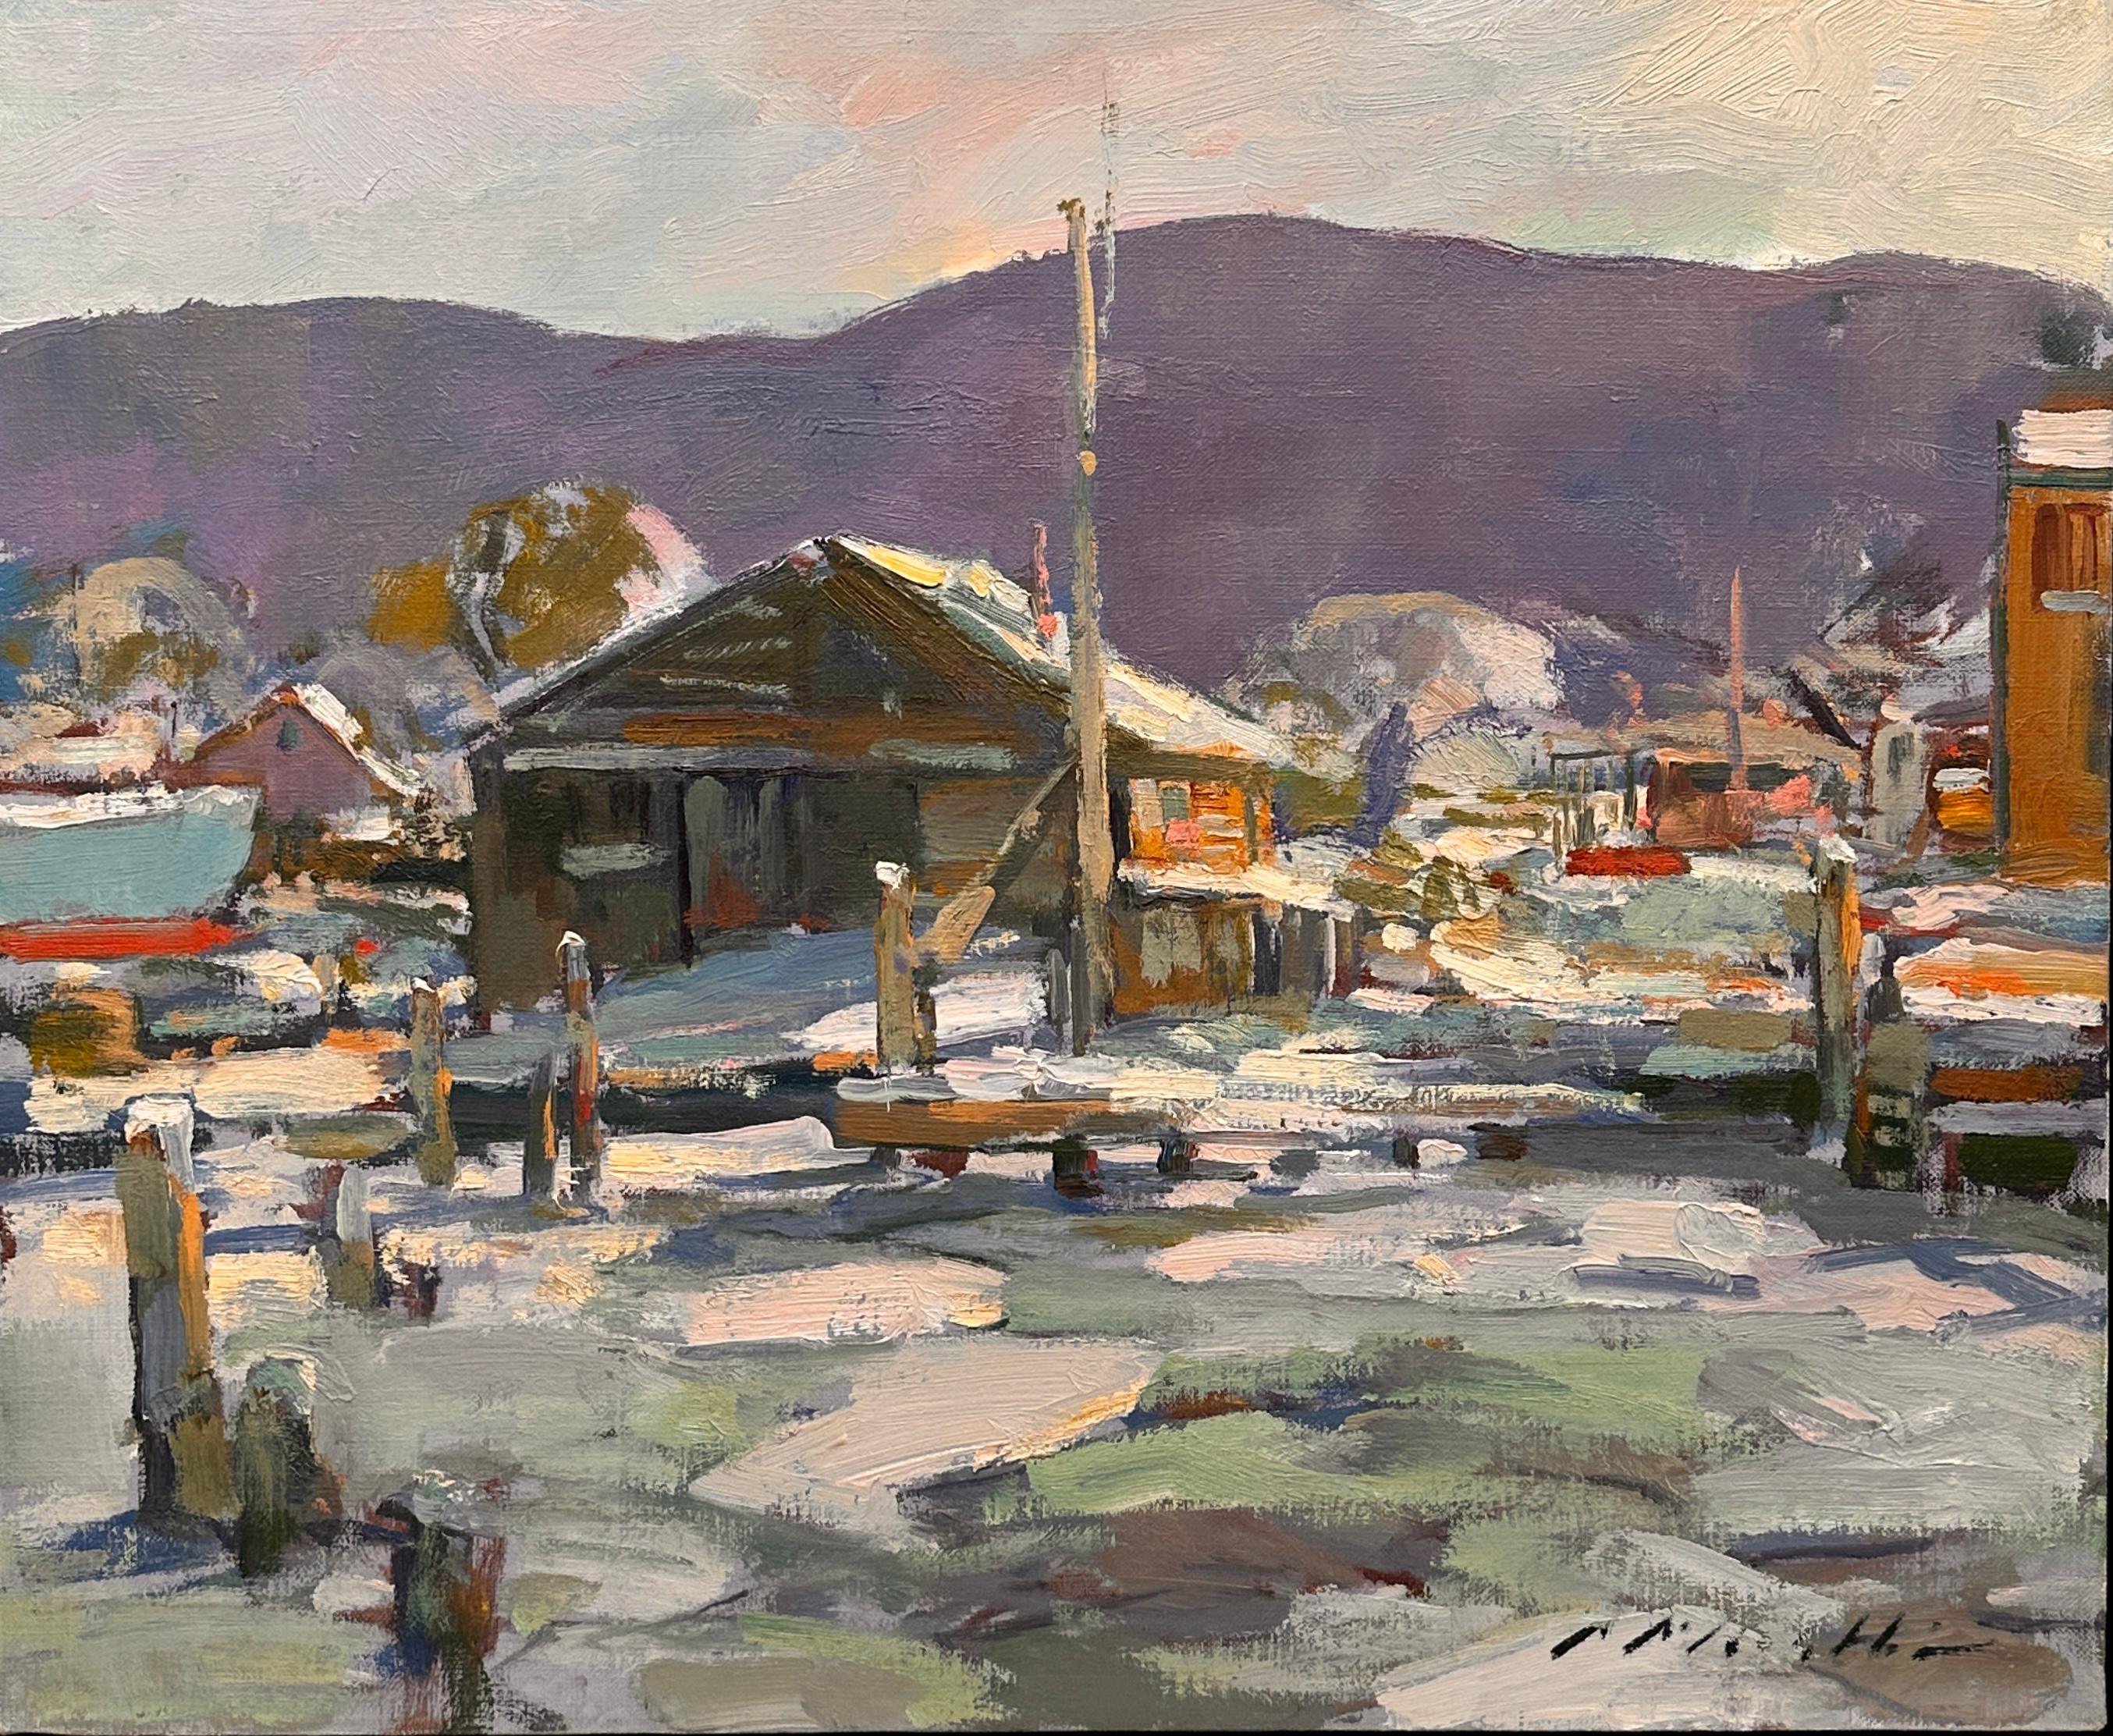 Charles Movalli (1945–2016) had a BA from Clark University and a PhD from the University of Connecticut. He painted and wrote about art for over thirty years. He belonged to the North Shore Arts Association, the Rockport Art Association, The Guild